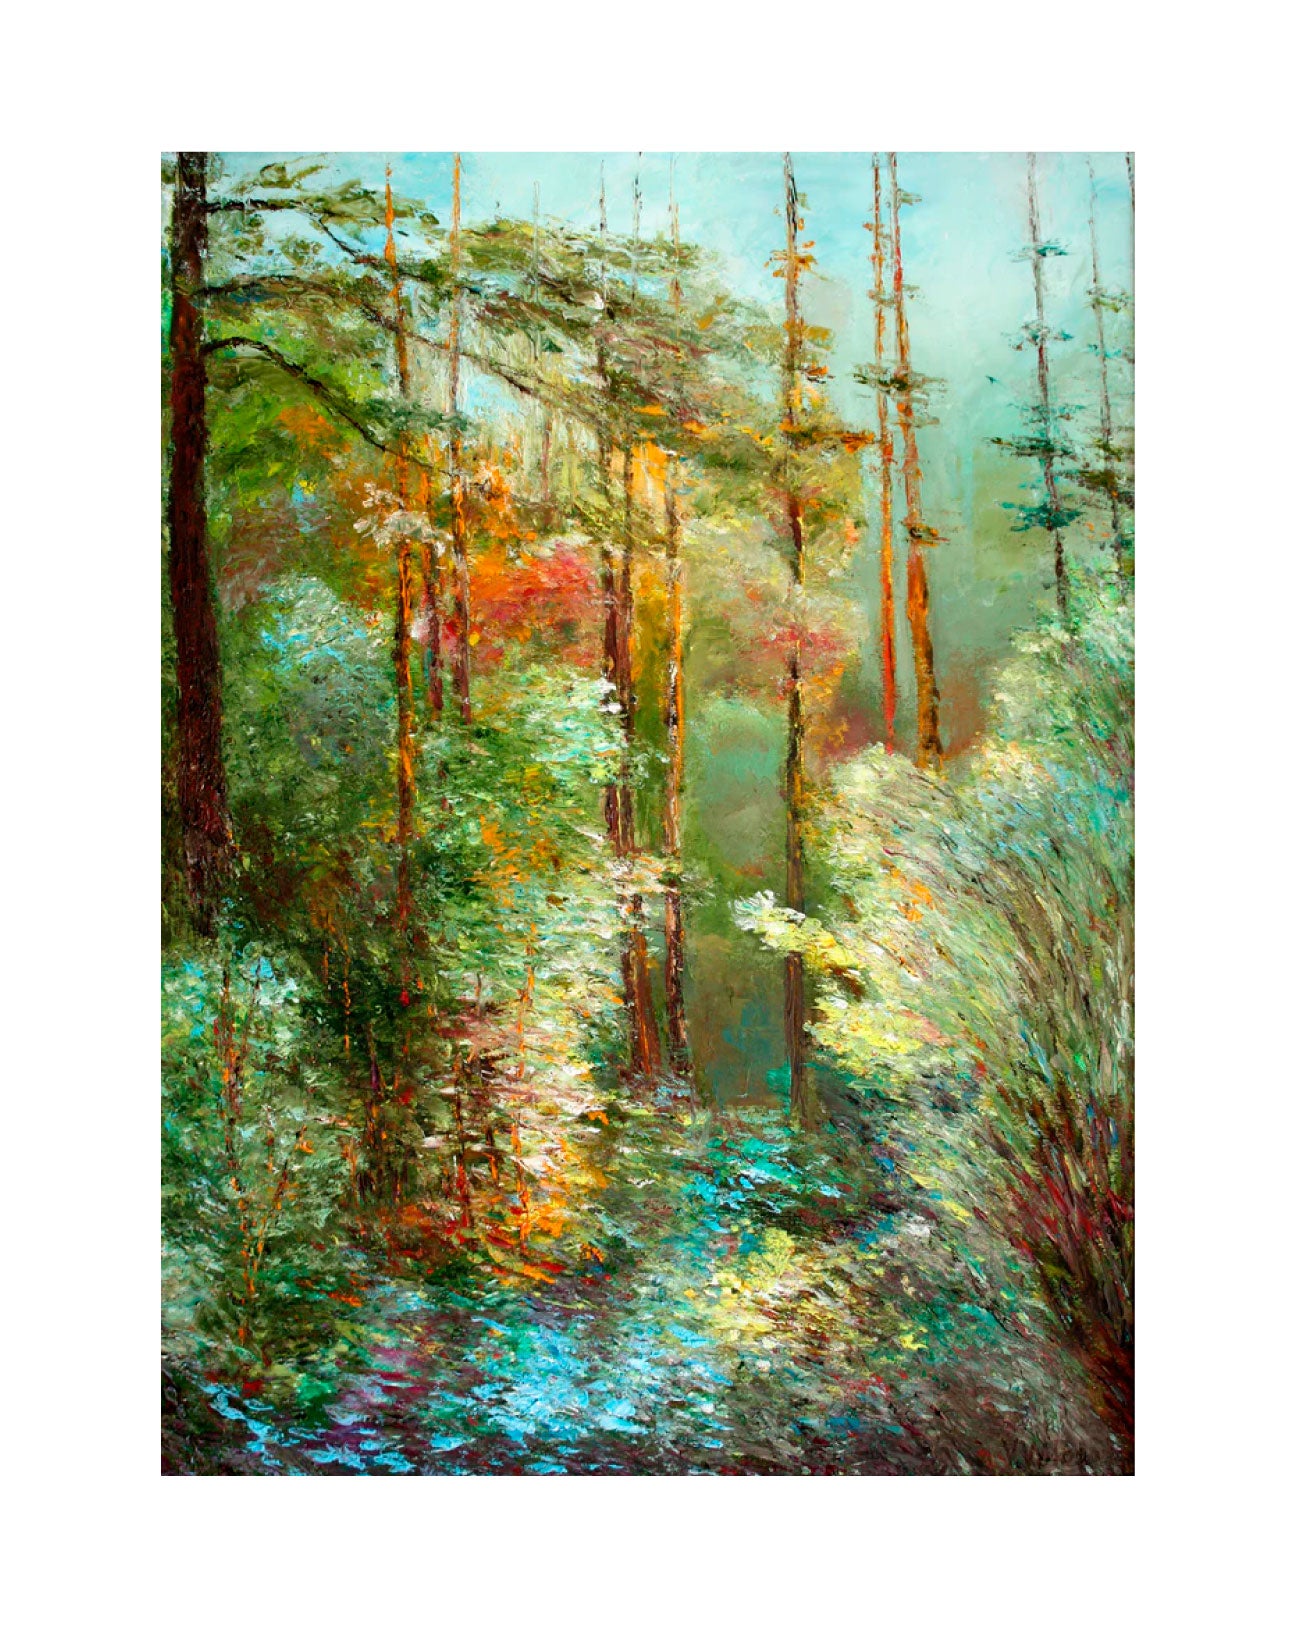 'LIGHT SHADOWS IN THE FOREST' - Oil on Canvas